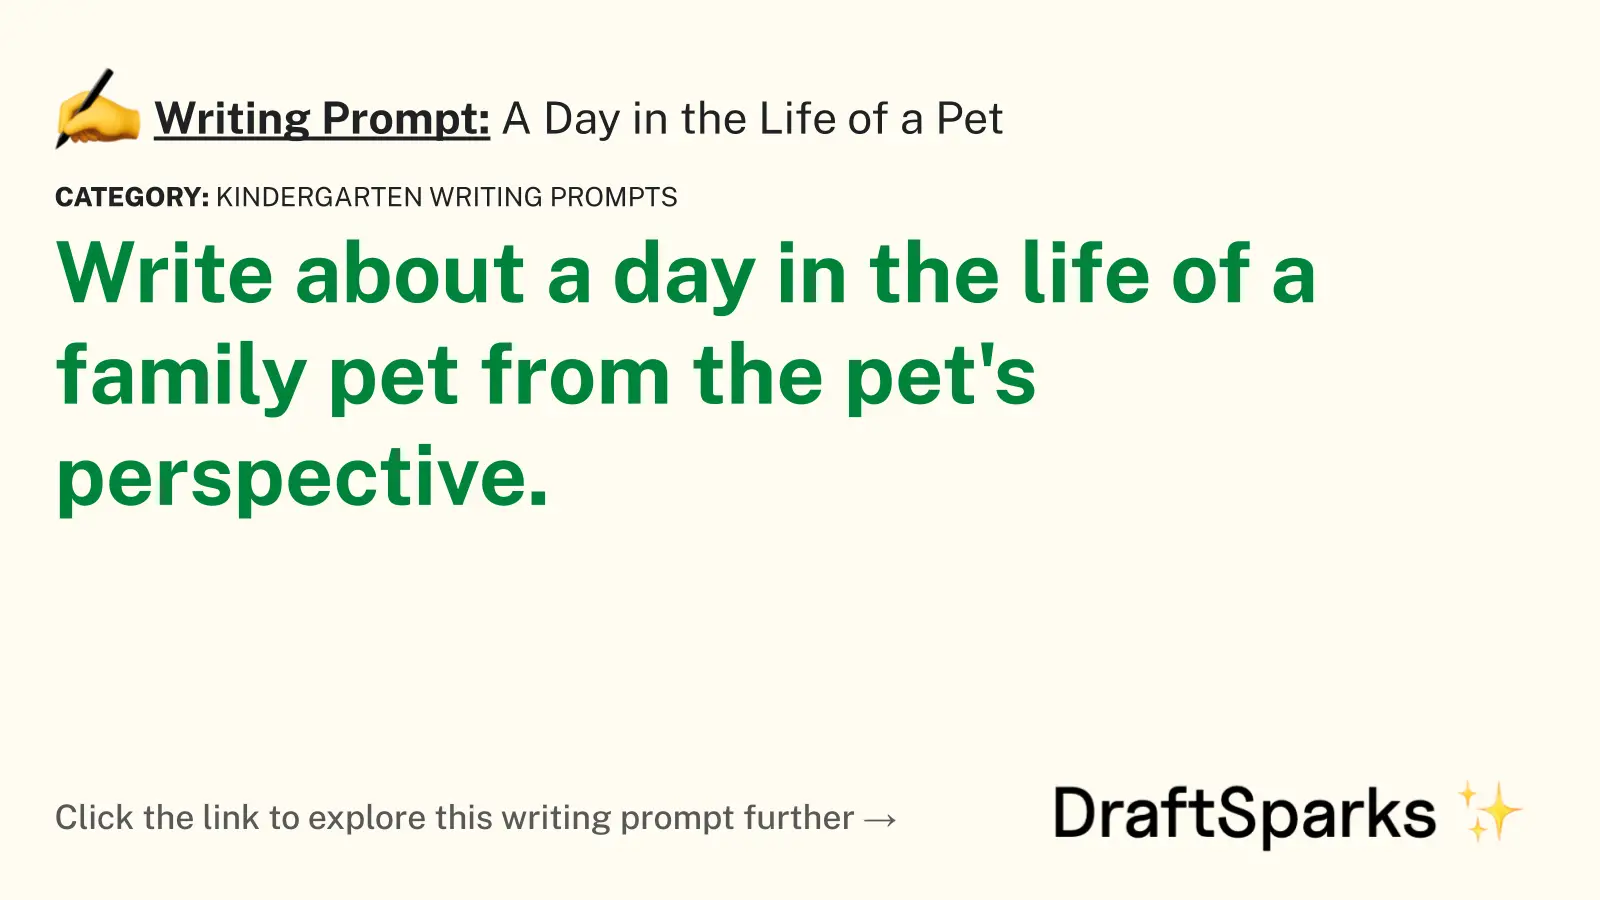 A Day in the Life of a Pet